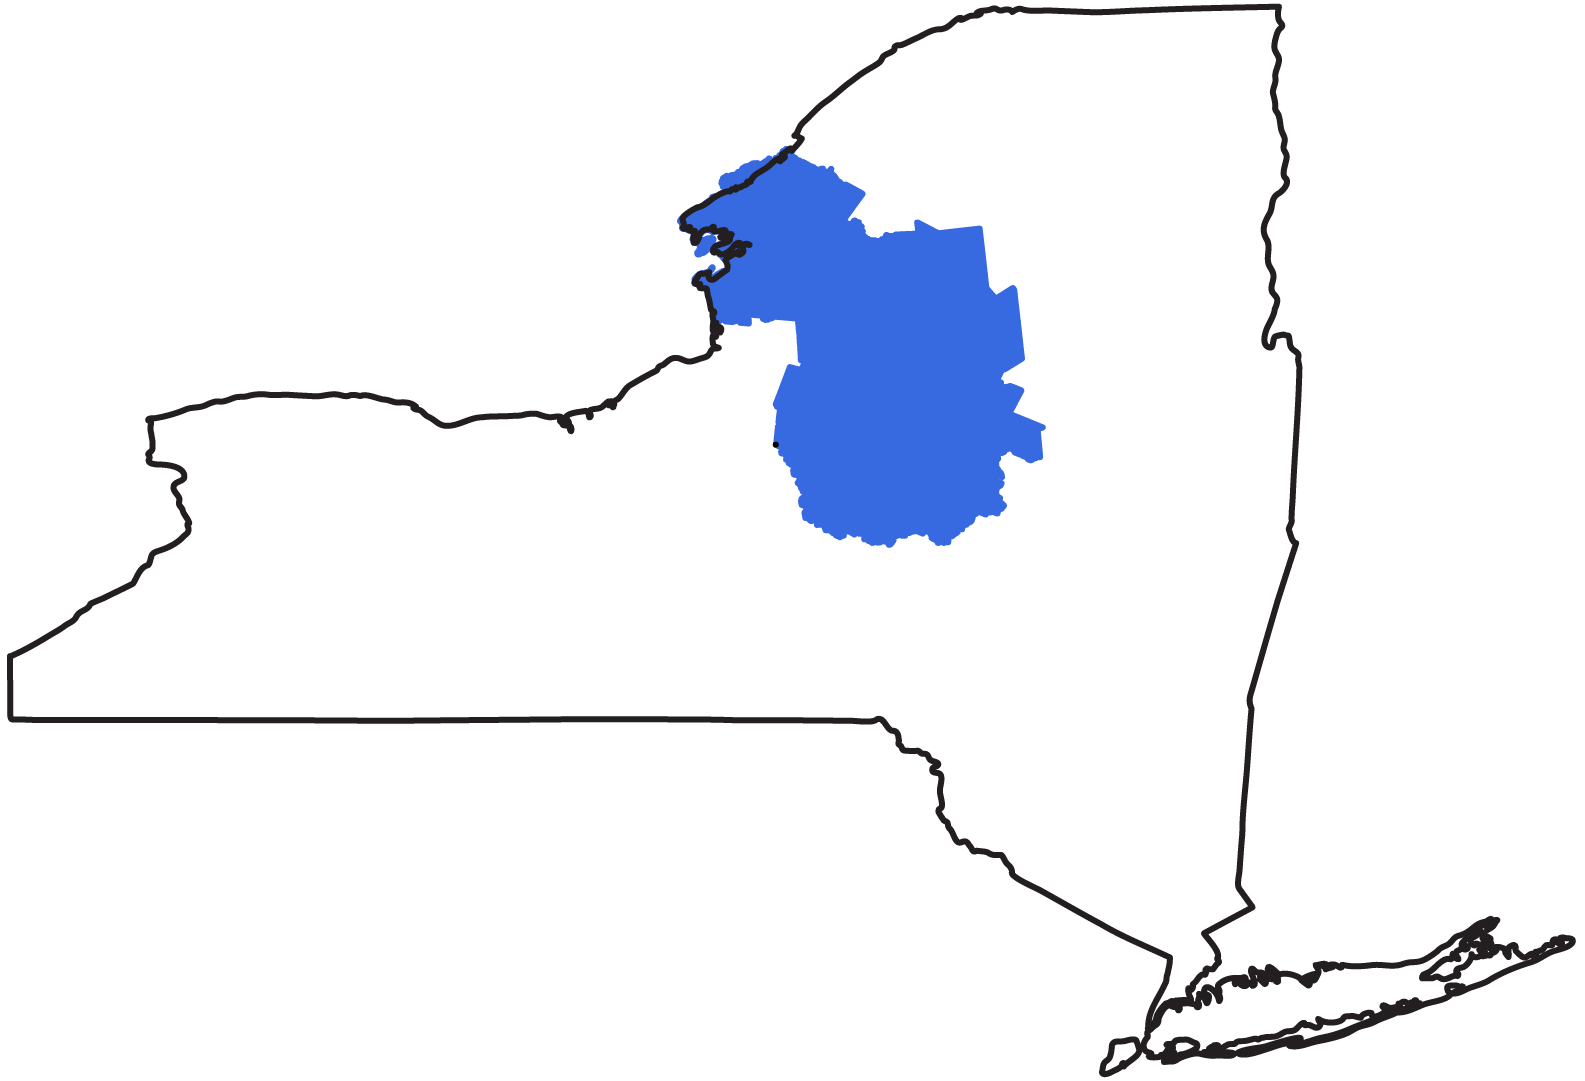 New York State map highlighting the Central region